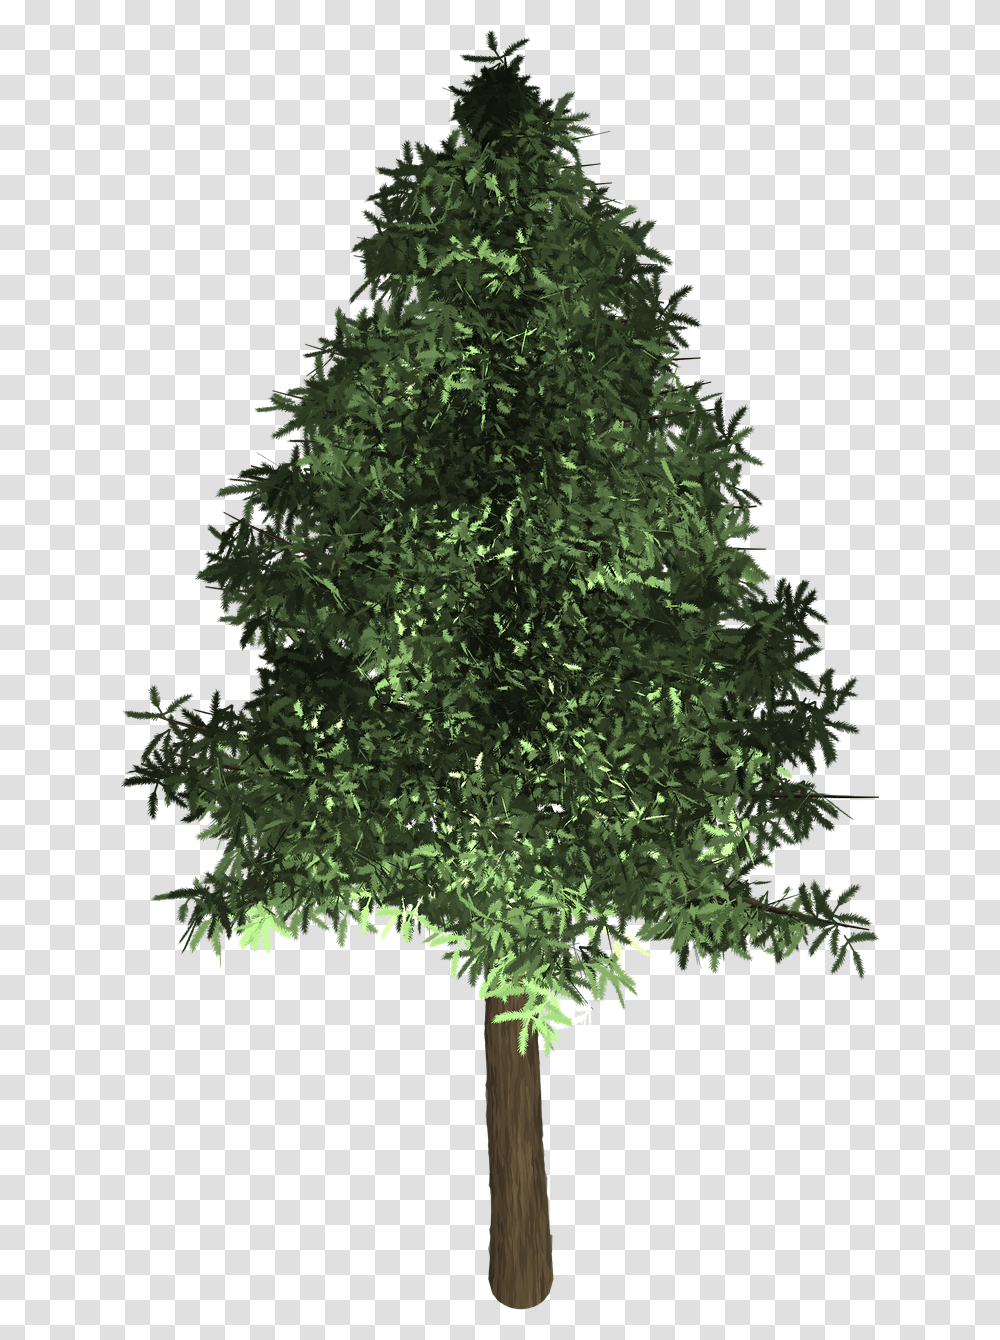 Evergreen Oak Tree In The Philippines, Plant, Christmas Tree, Ornament, Sphere Transparent Png